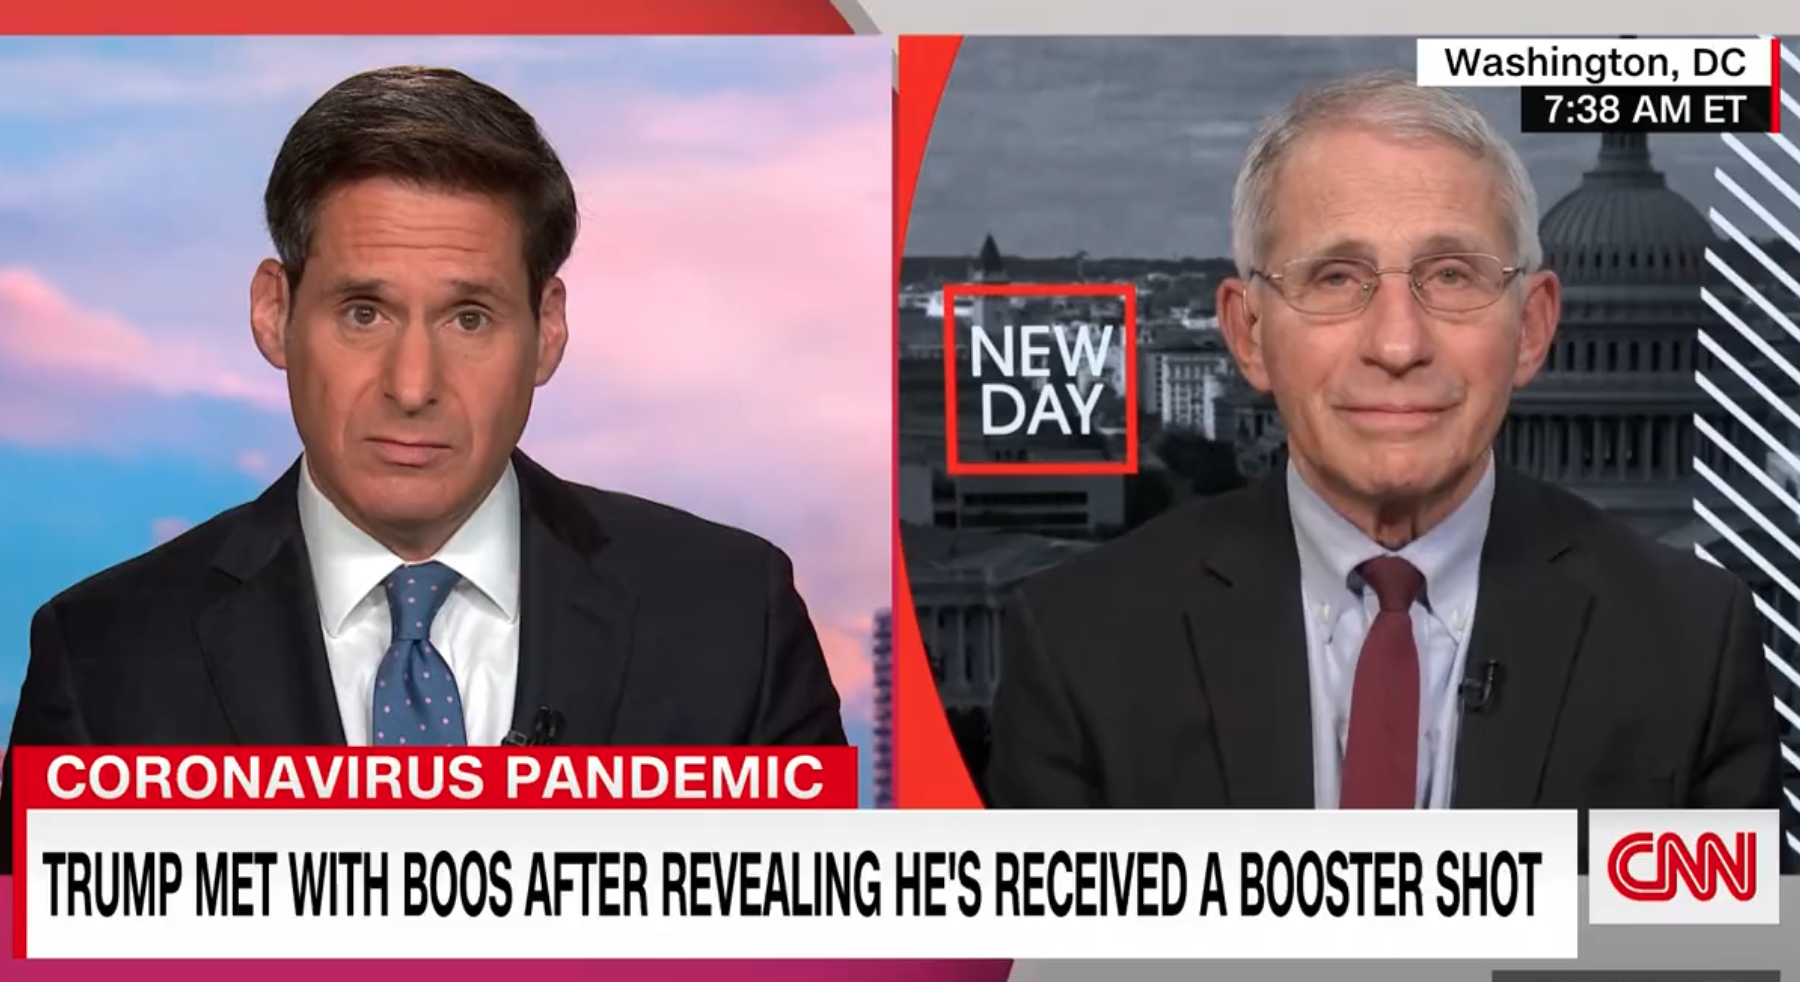 John Berman and Dr. Anthony Fauci